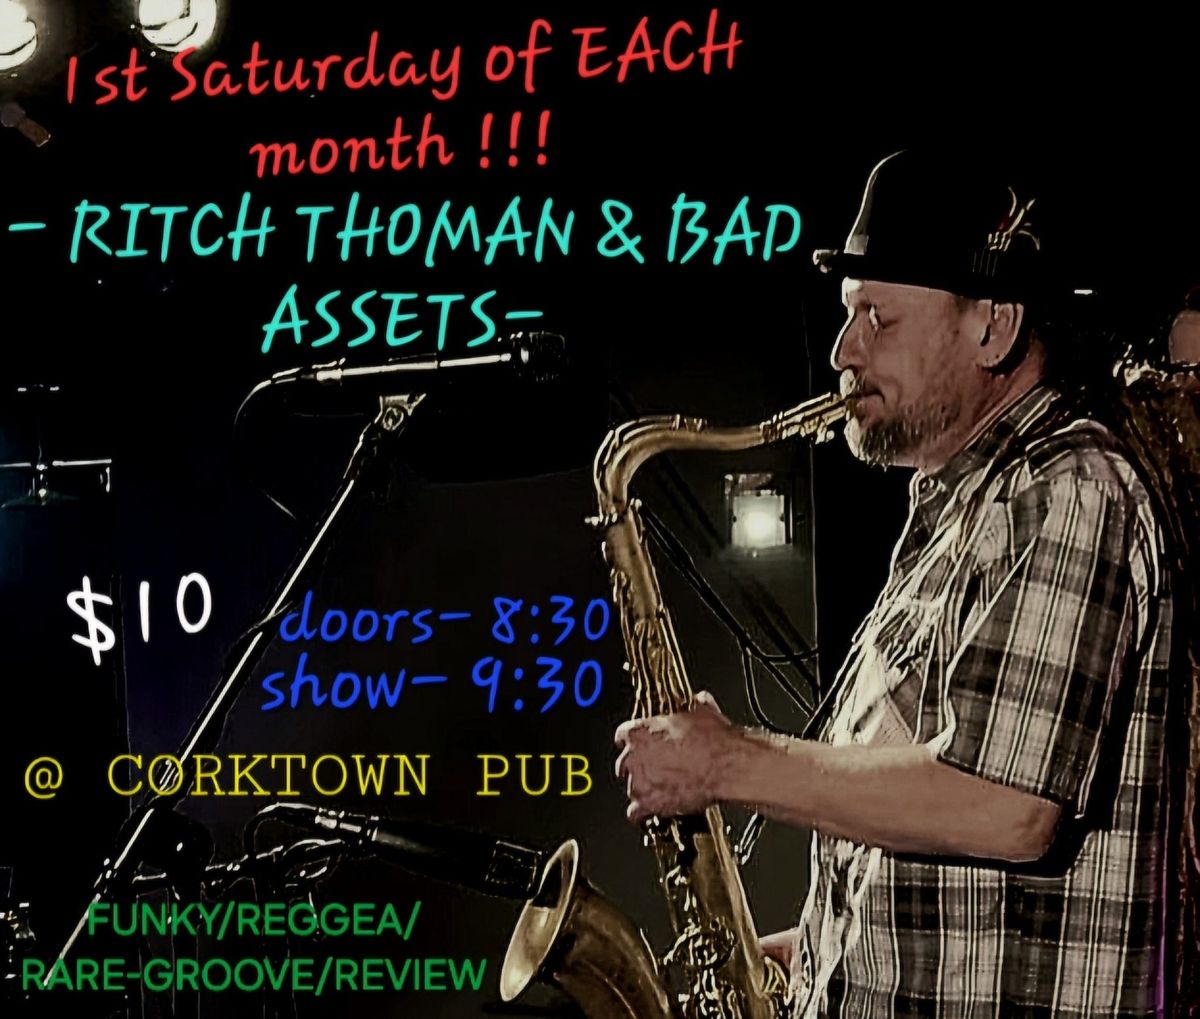 Ritch Thoman and the Bad Assets